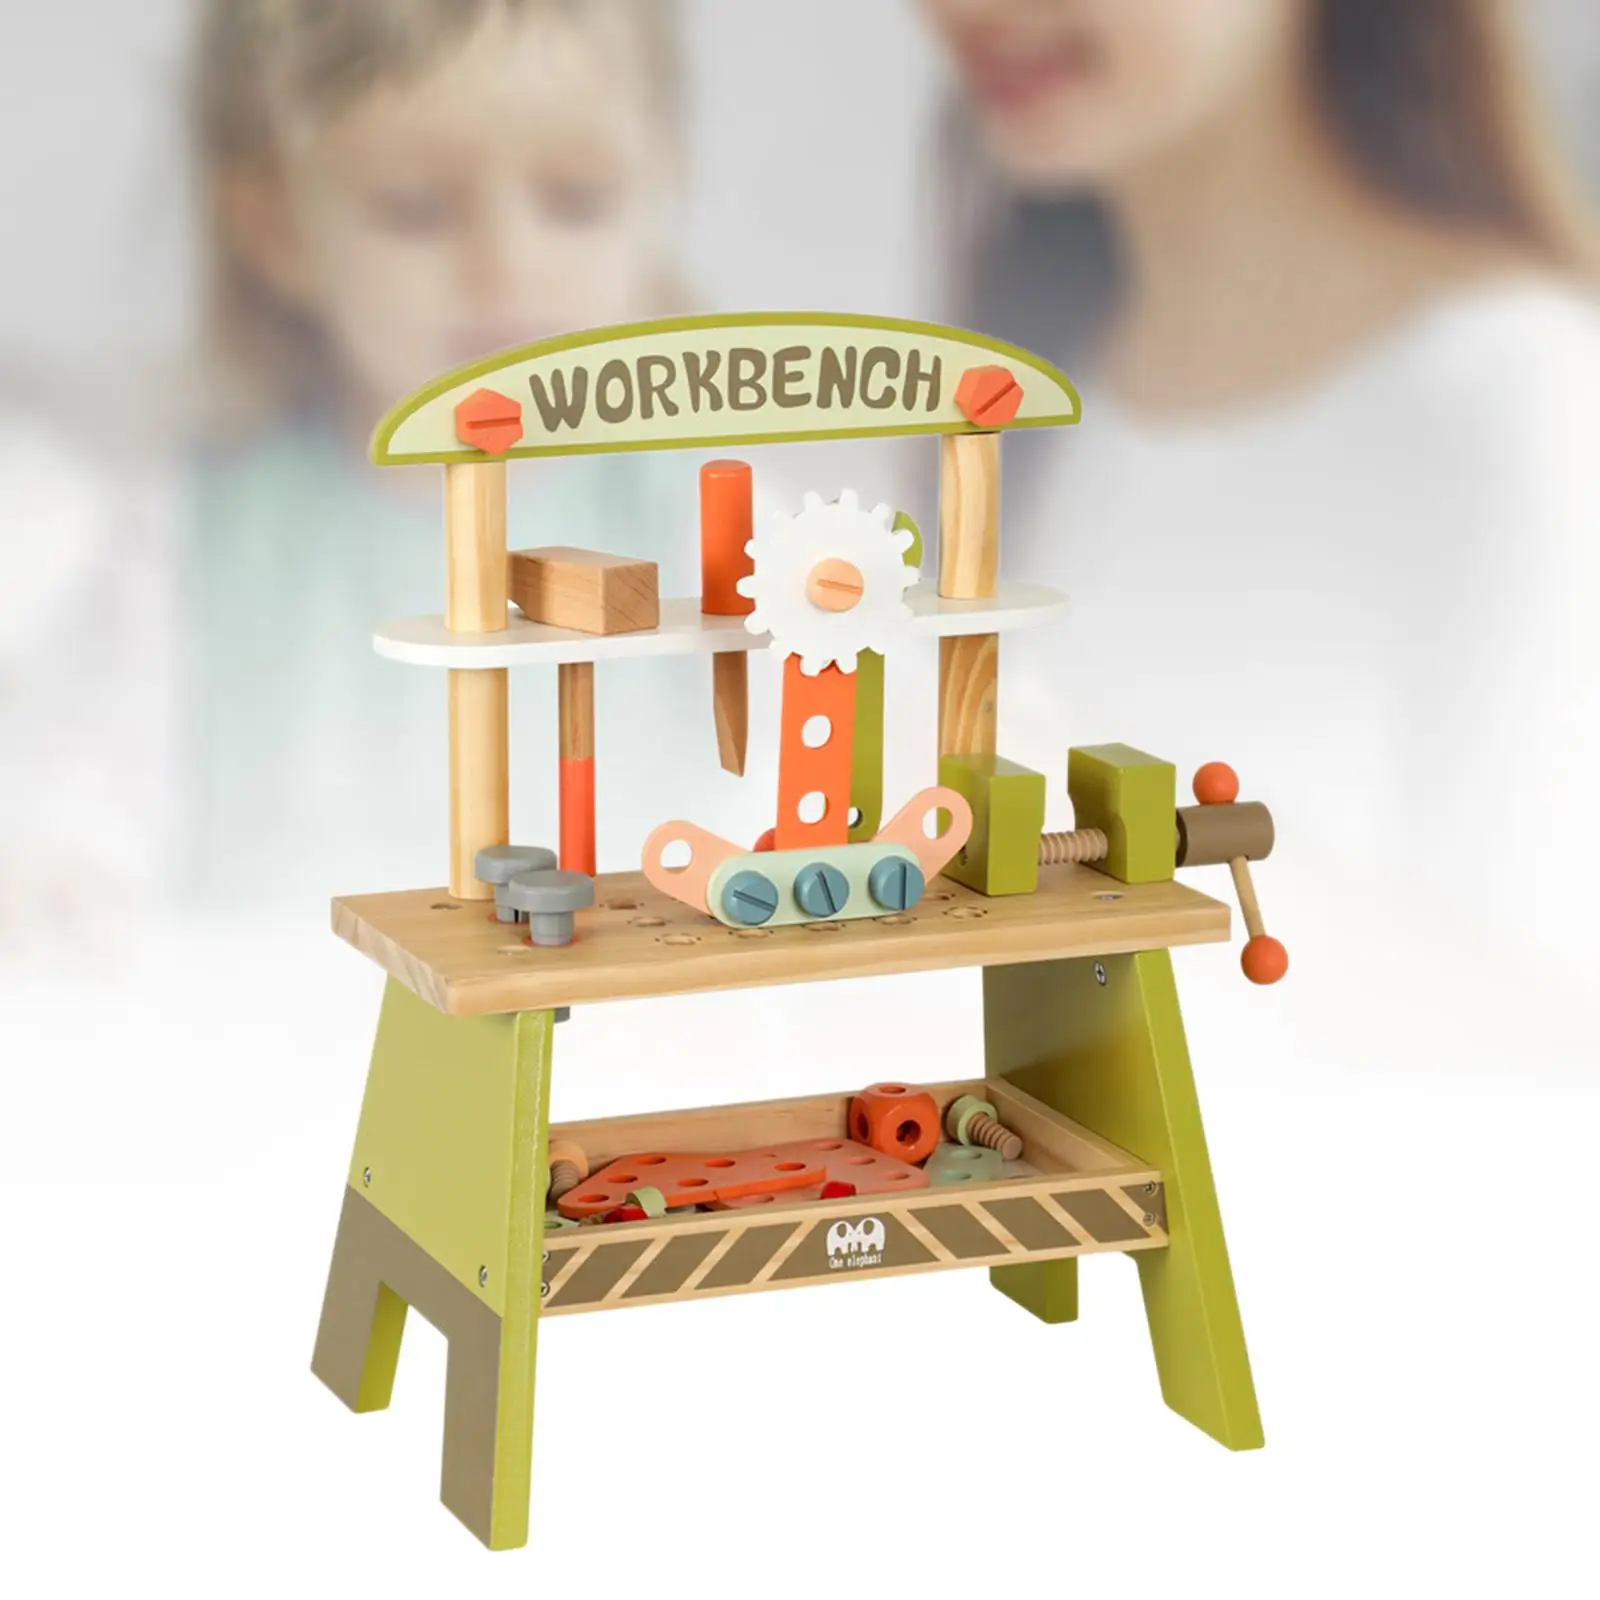 Pretend Play Construction Toy Kid`s Wooden Tool Bench Toy for Child Holiday Present 2 3 4 5 Years Old Christmas Gifts Girls Boys